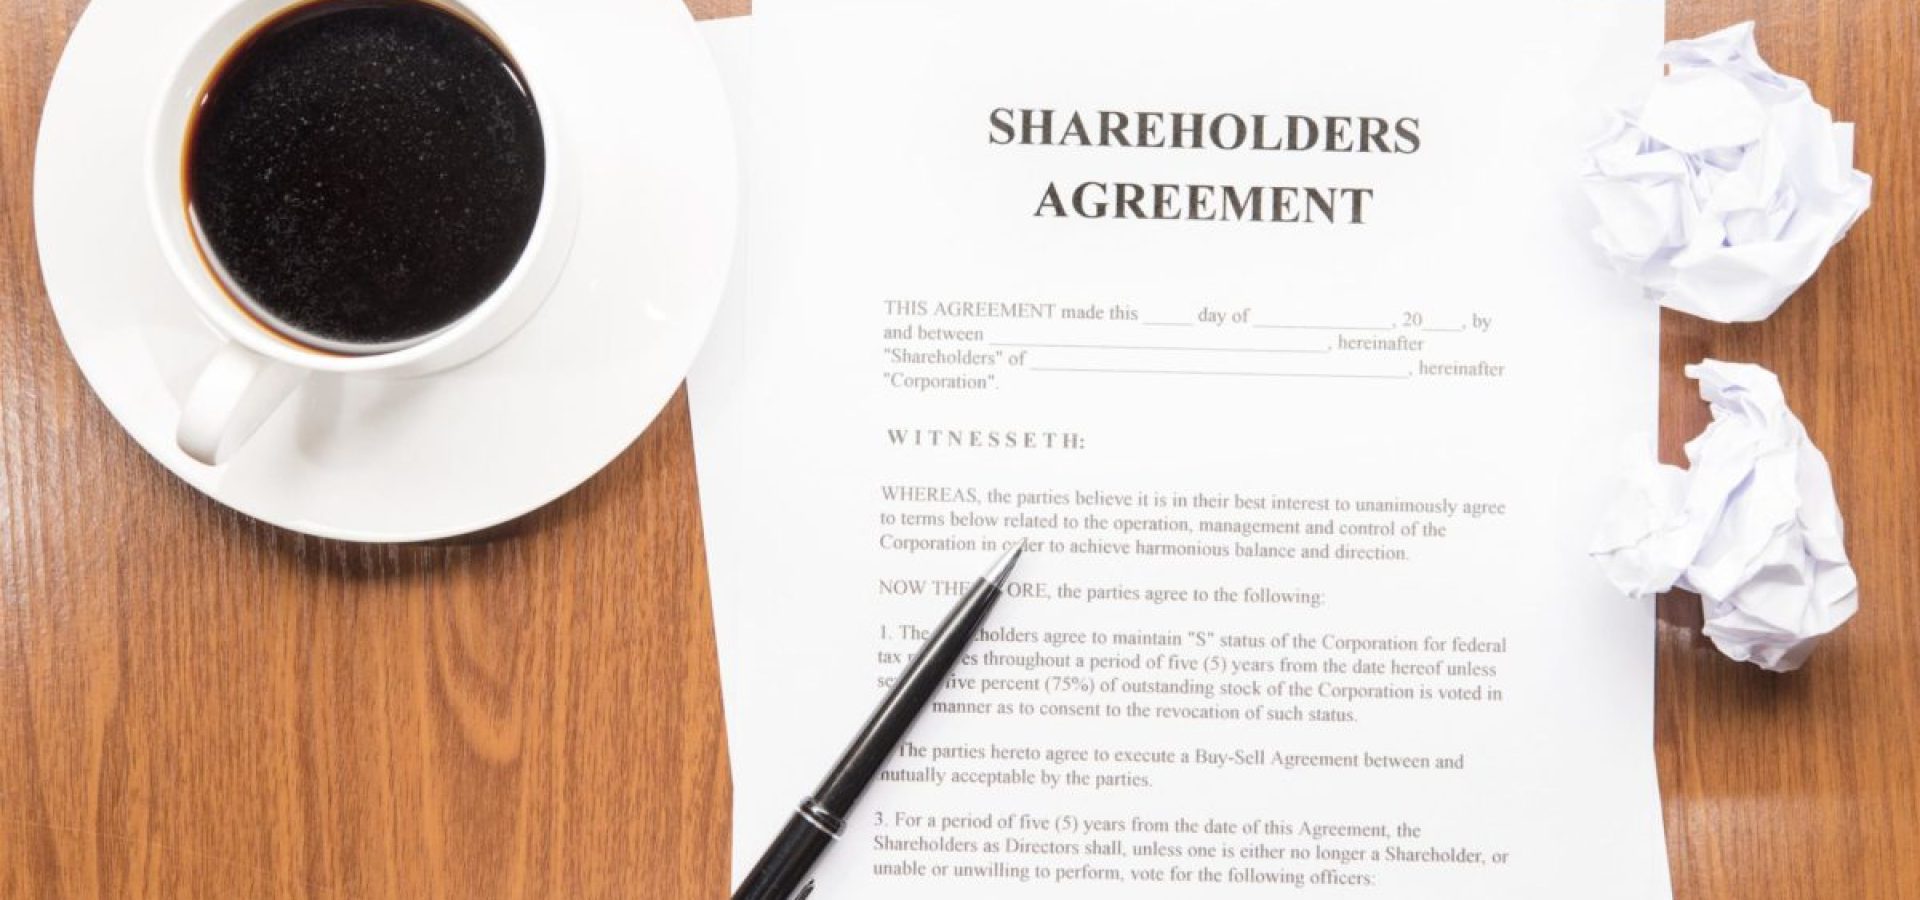 Shareholders Agreement and its Role in Business